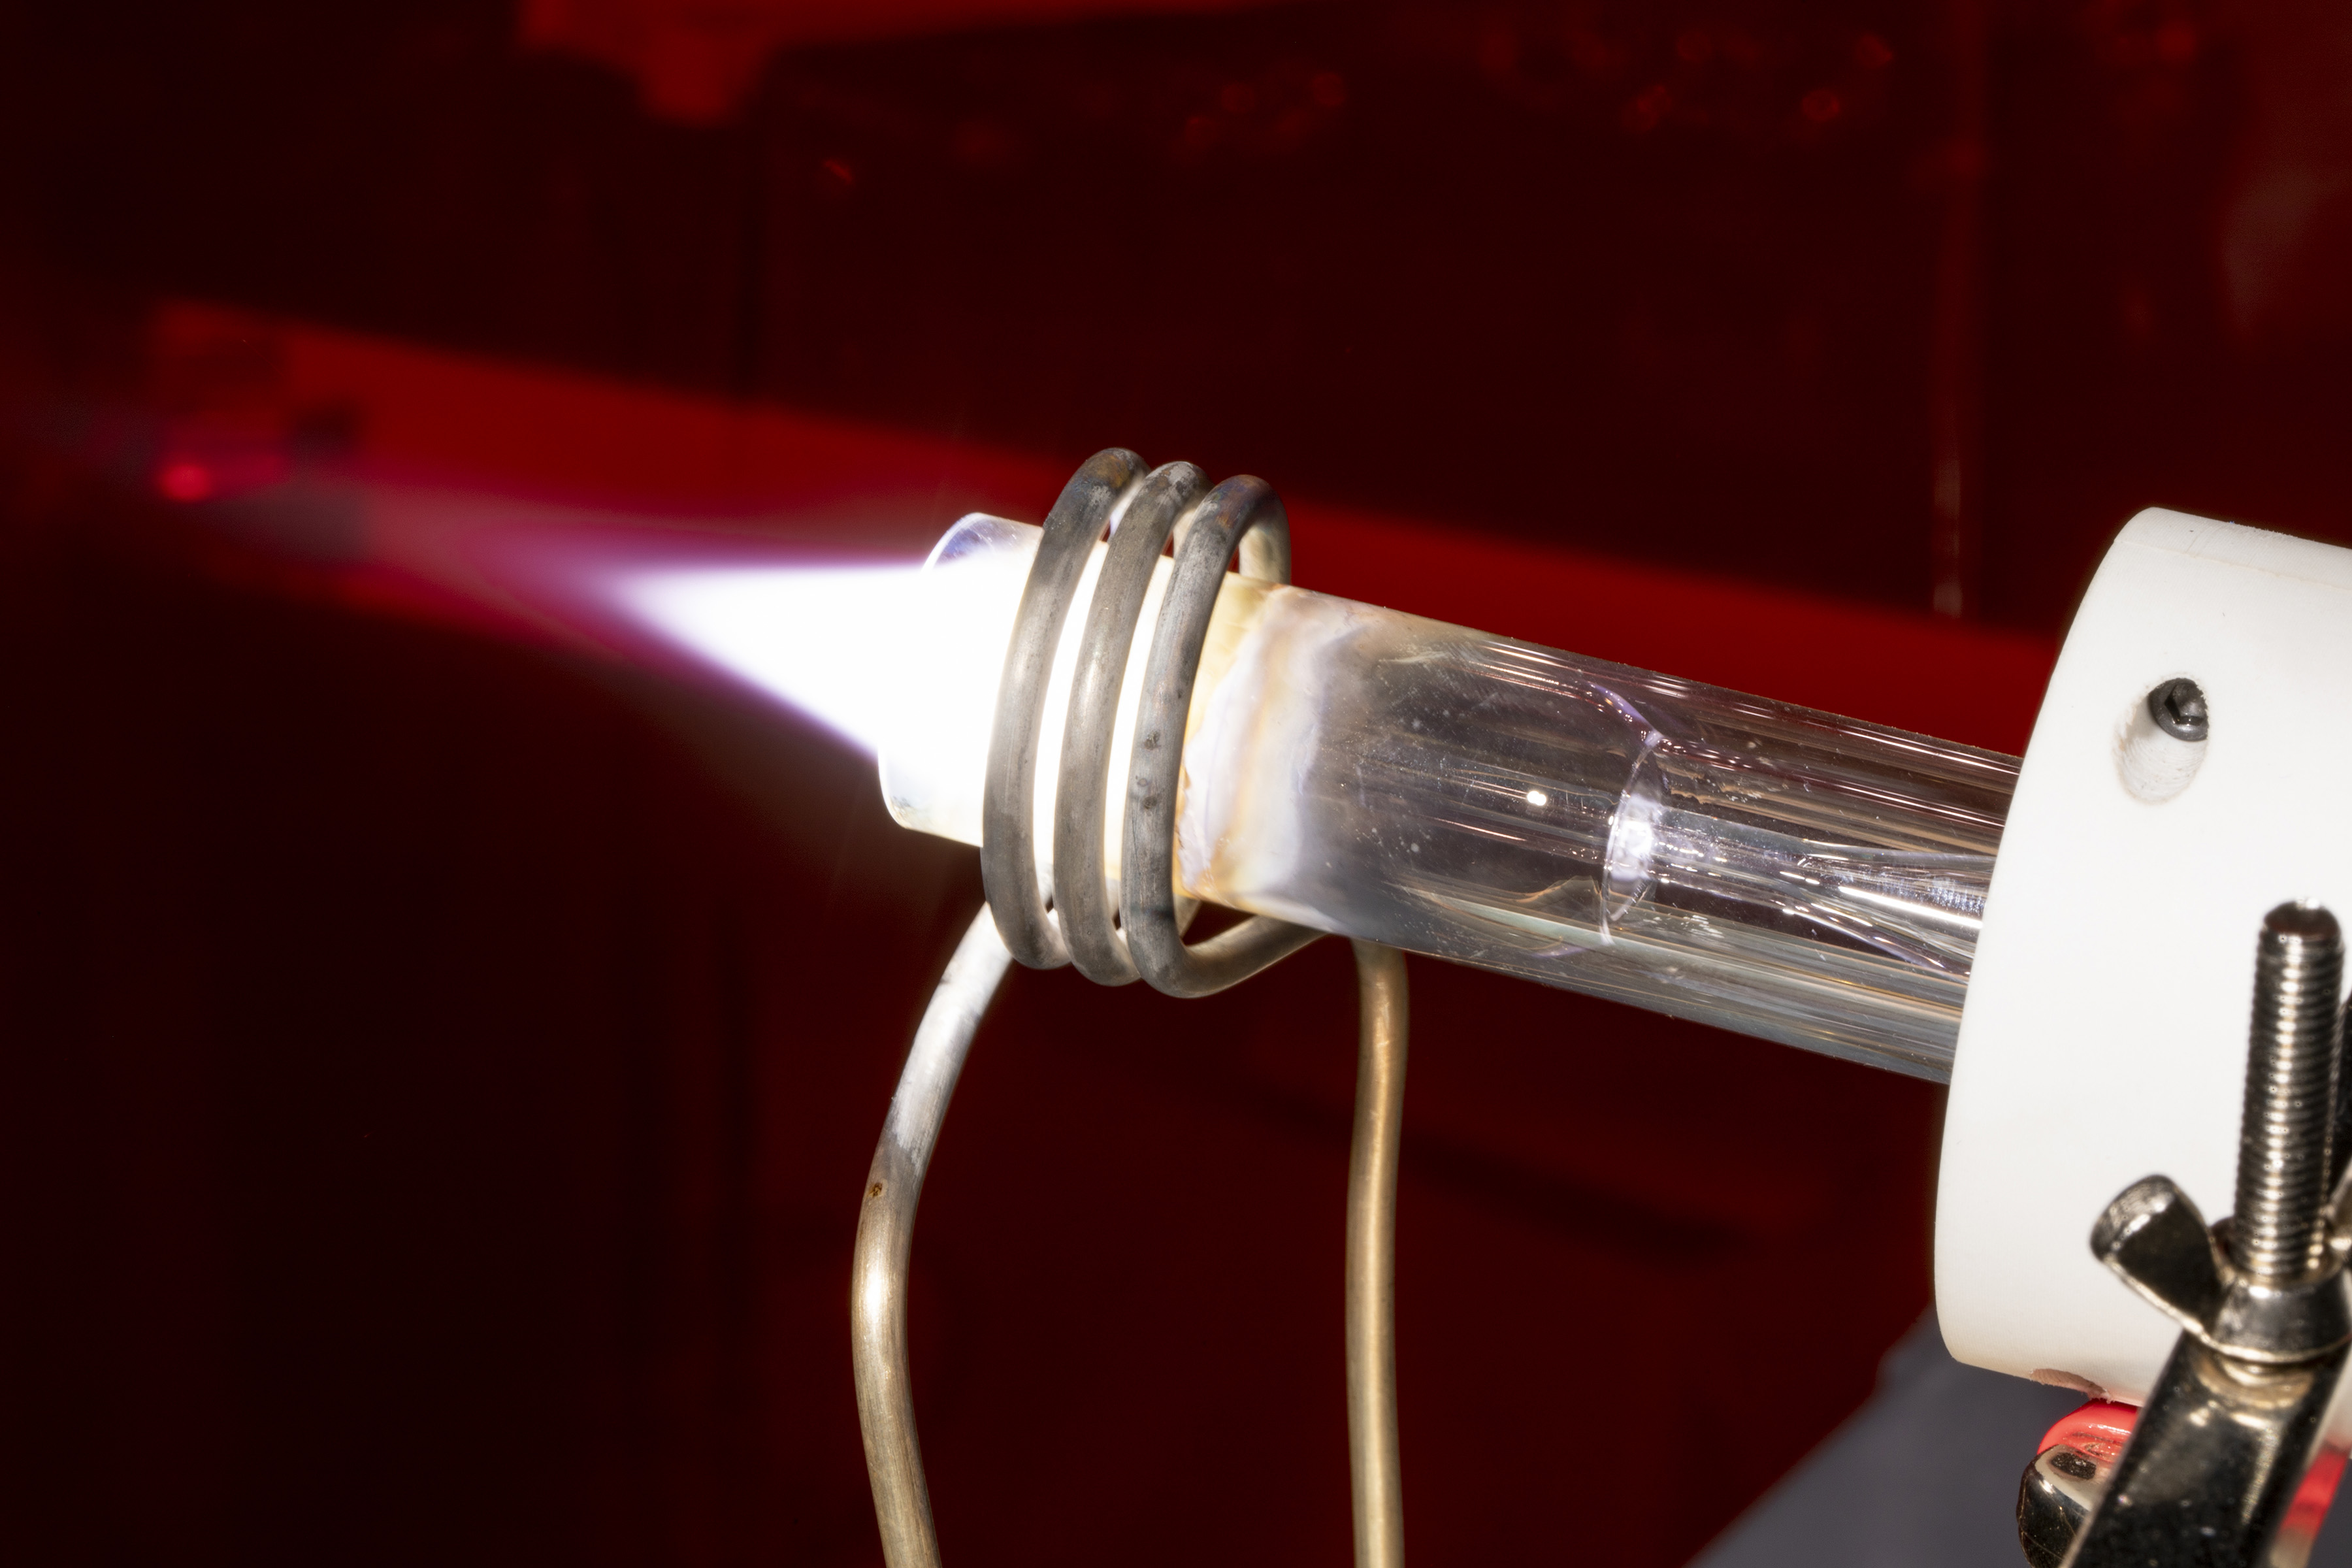 Plasma source developed for testing hypersonic technologies